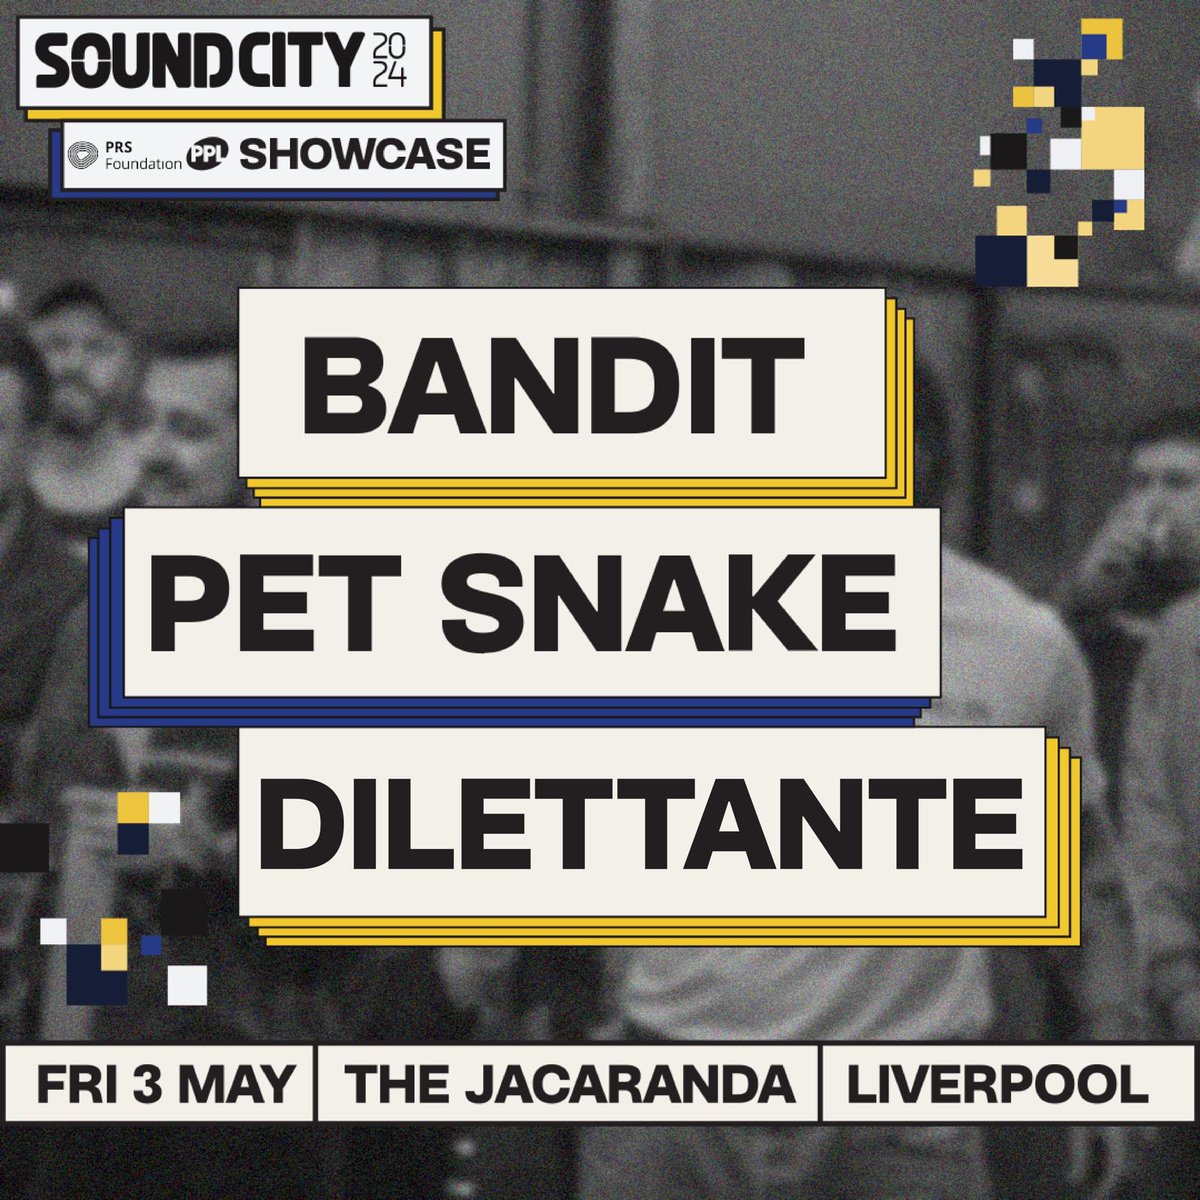 Something SPECTACULAR has been brewing behind the scenes in Bandit HQ which we can’t tell you JUST YET!!! 

We’ve ALSO been asked by PRS Foundation to play their showcase at Sound City on Friday evening at the Jacaranda at 9:20pm.